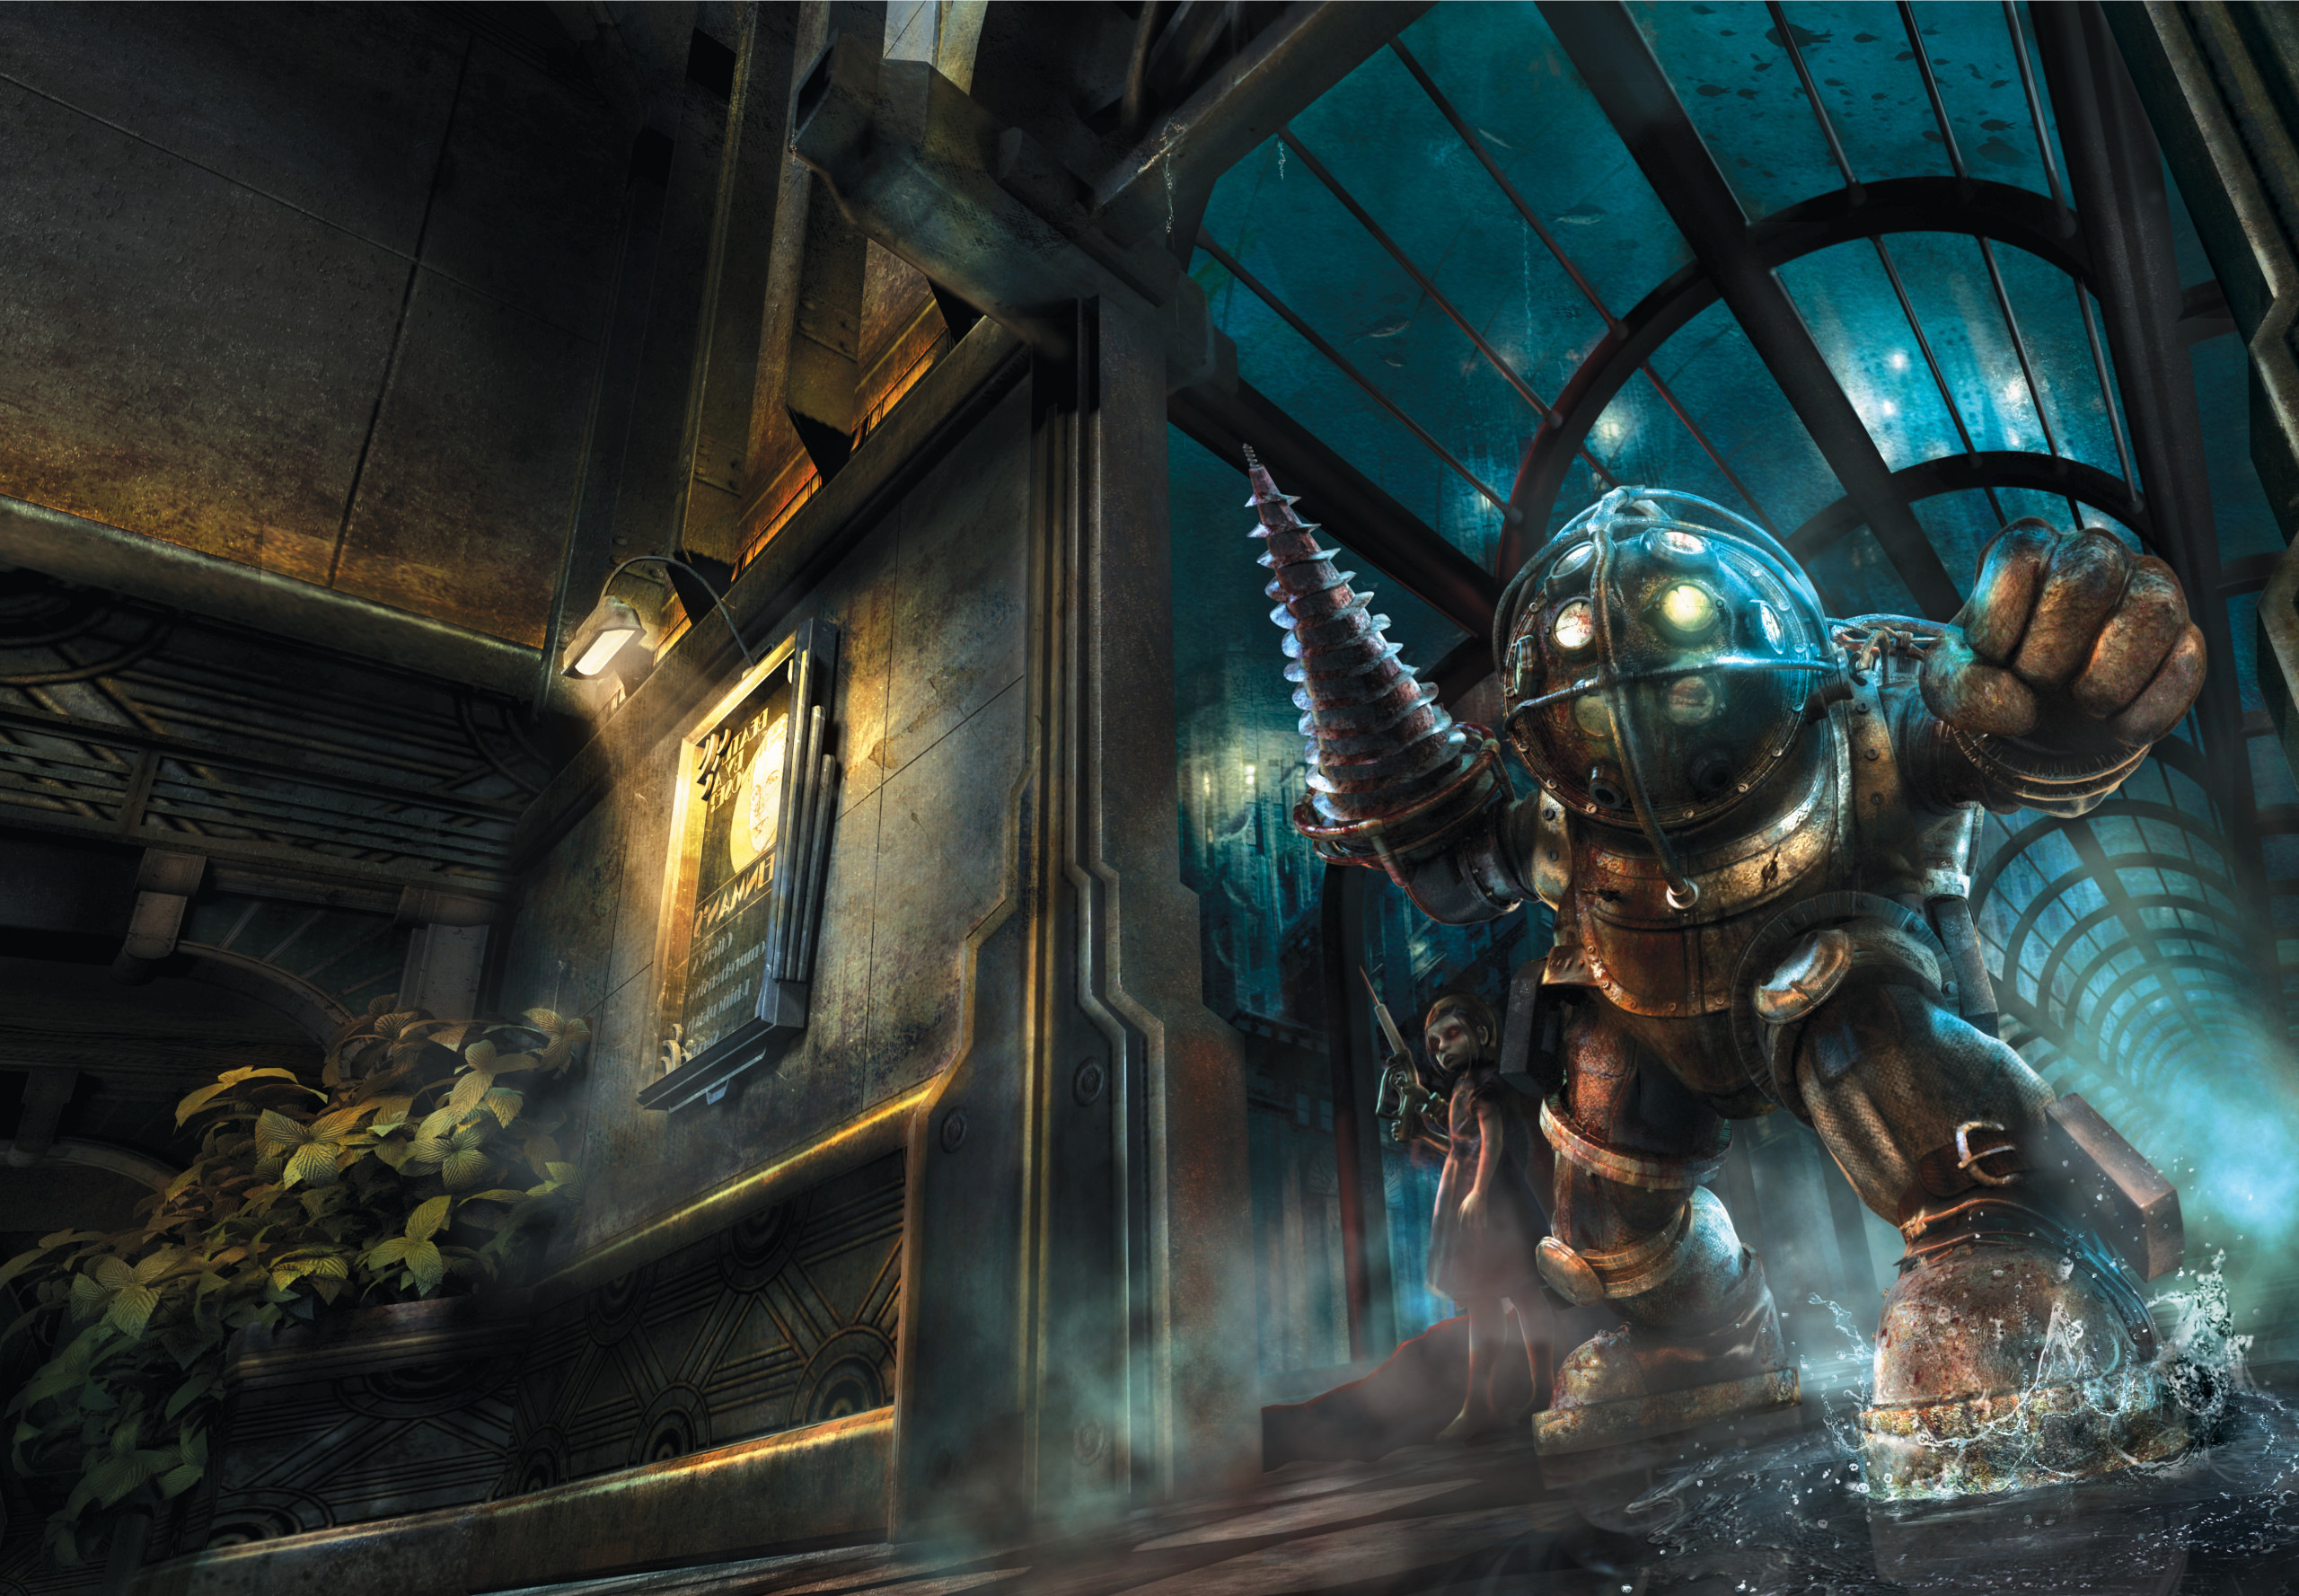 Francis Lawrence to Direct ‘BioShock’ Film Adaptation; Michael Green to Write